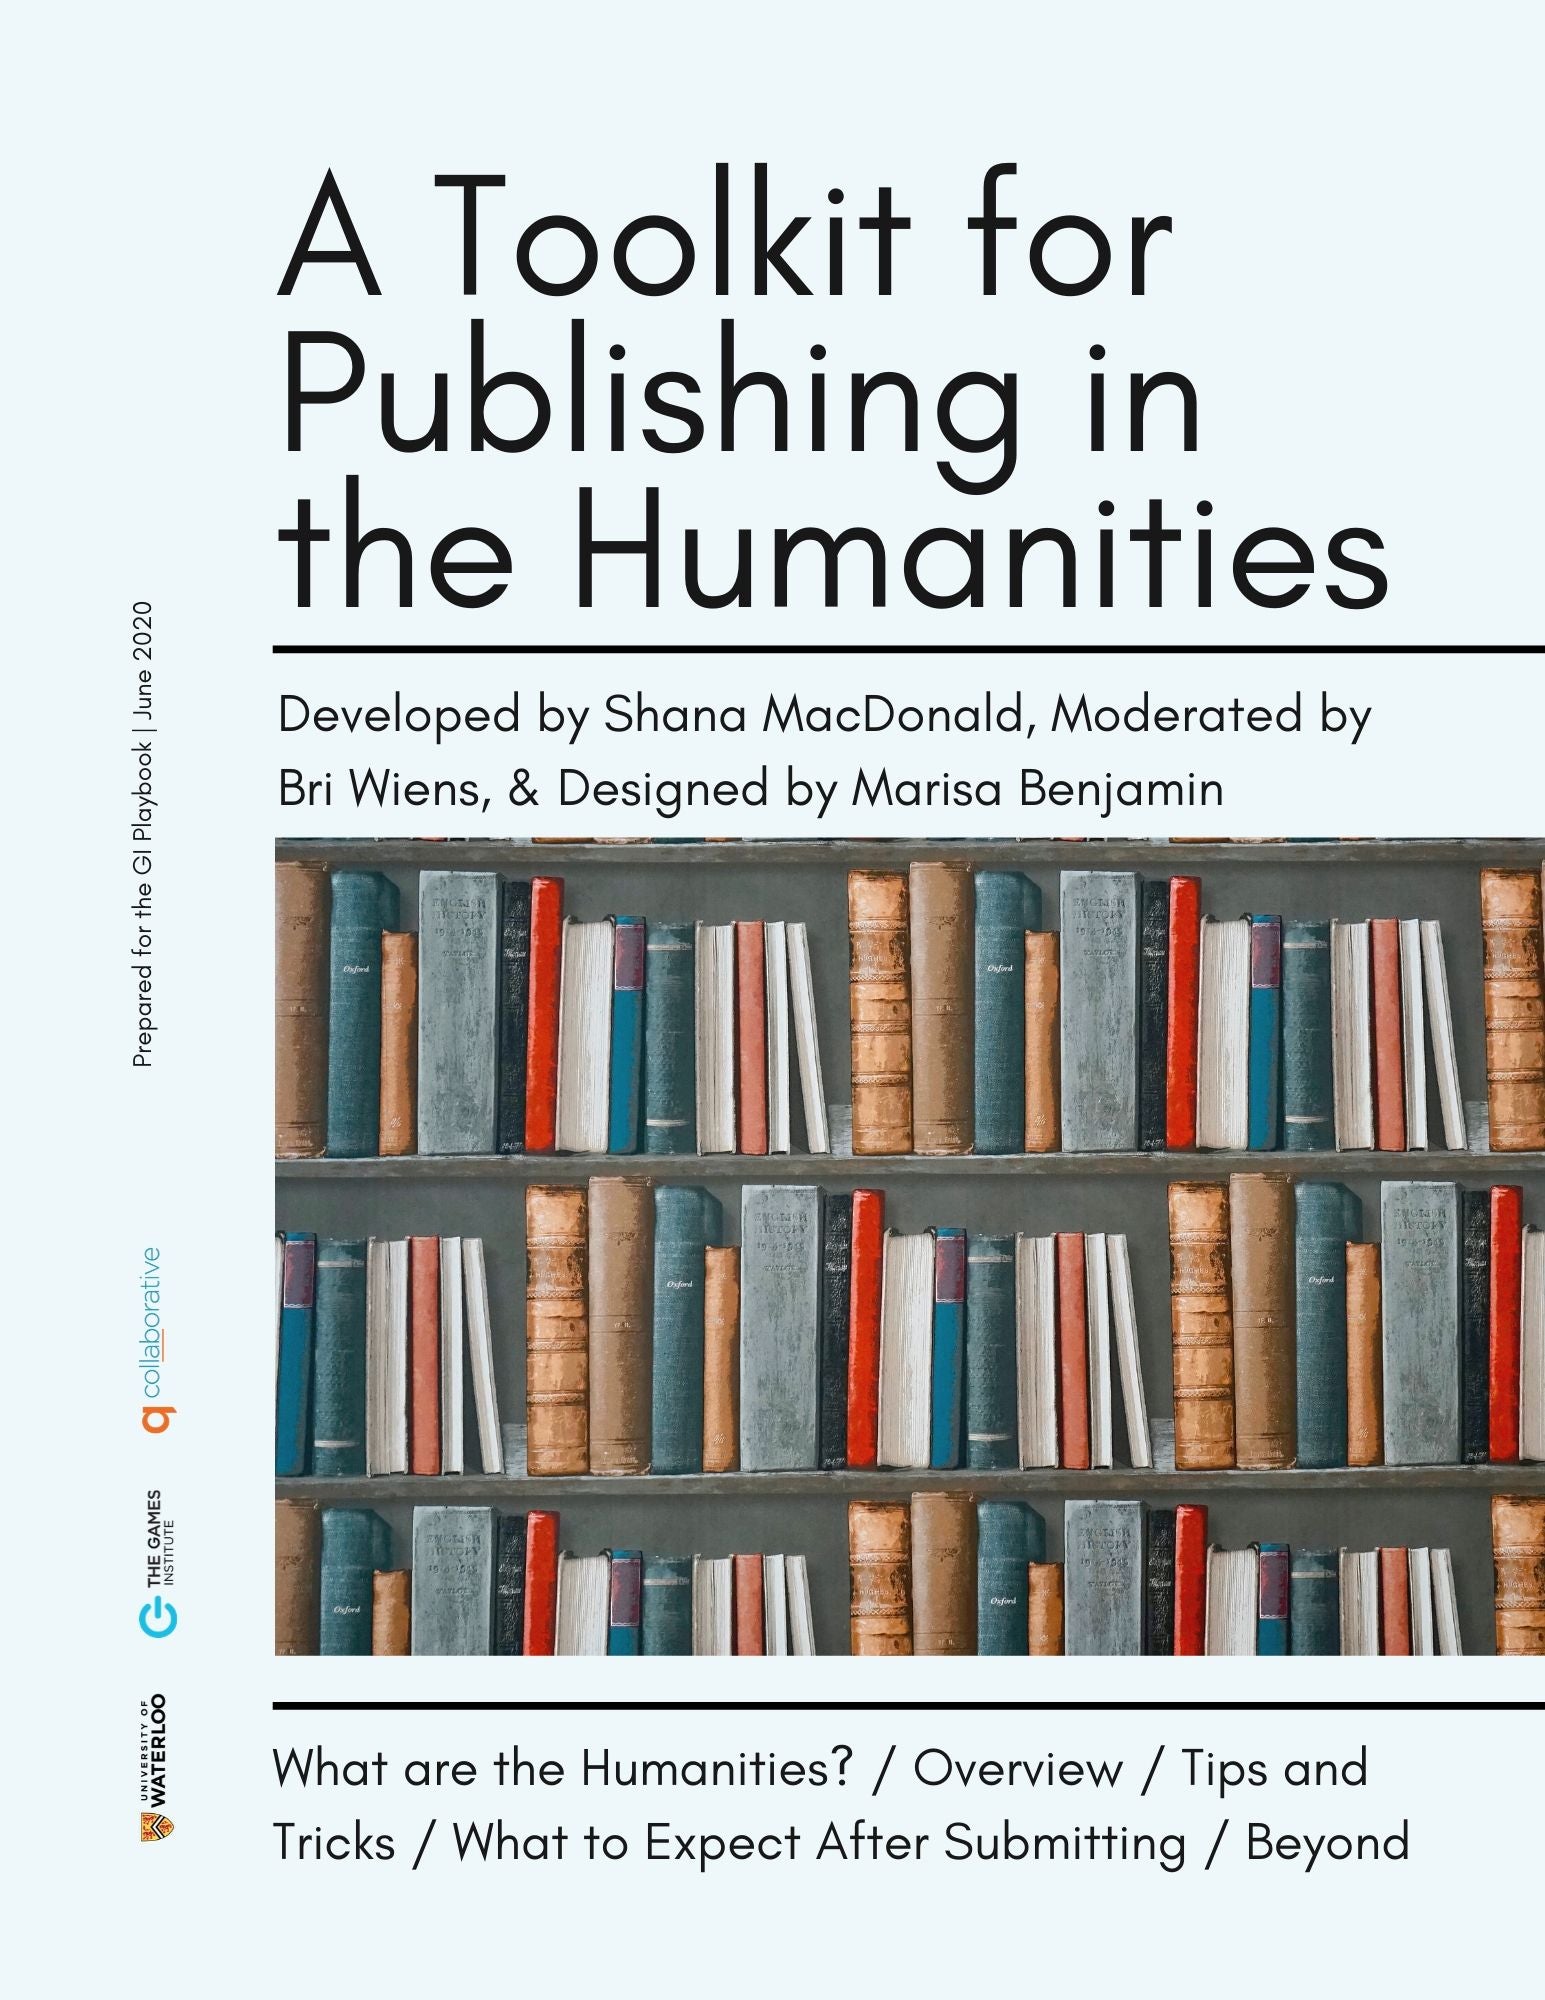 Publishing in the Humanities Toolkit: Page One